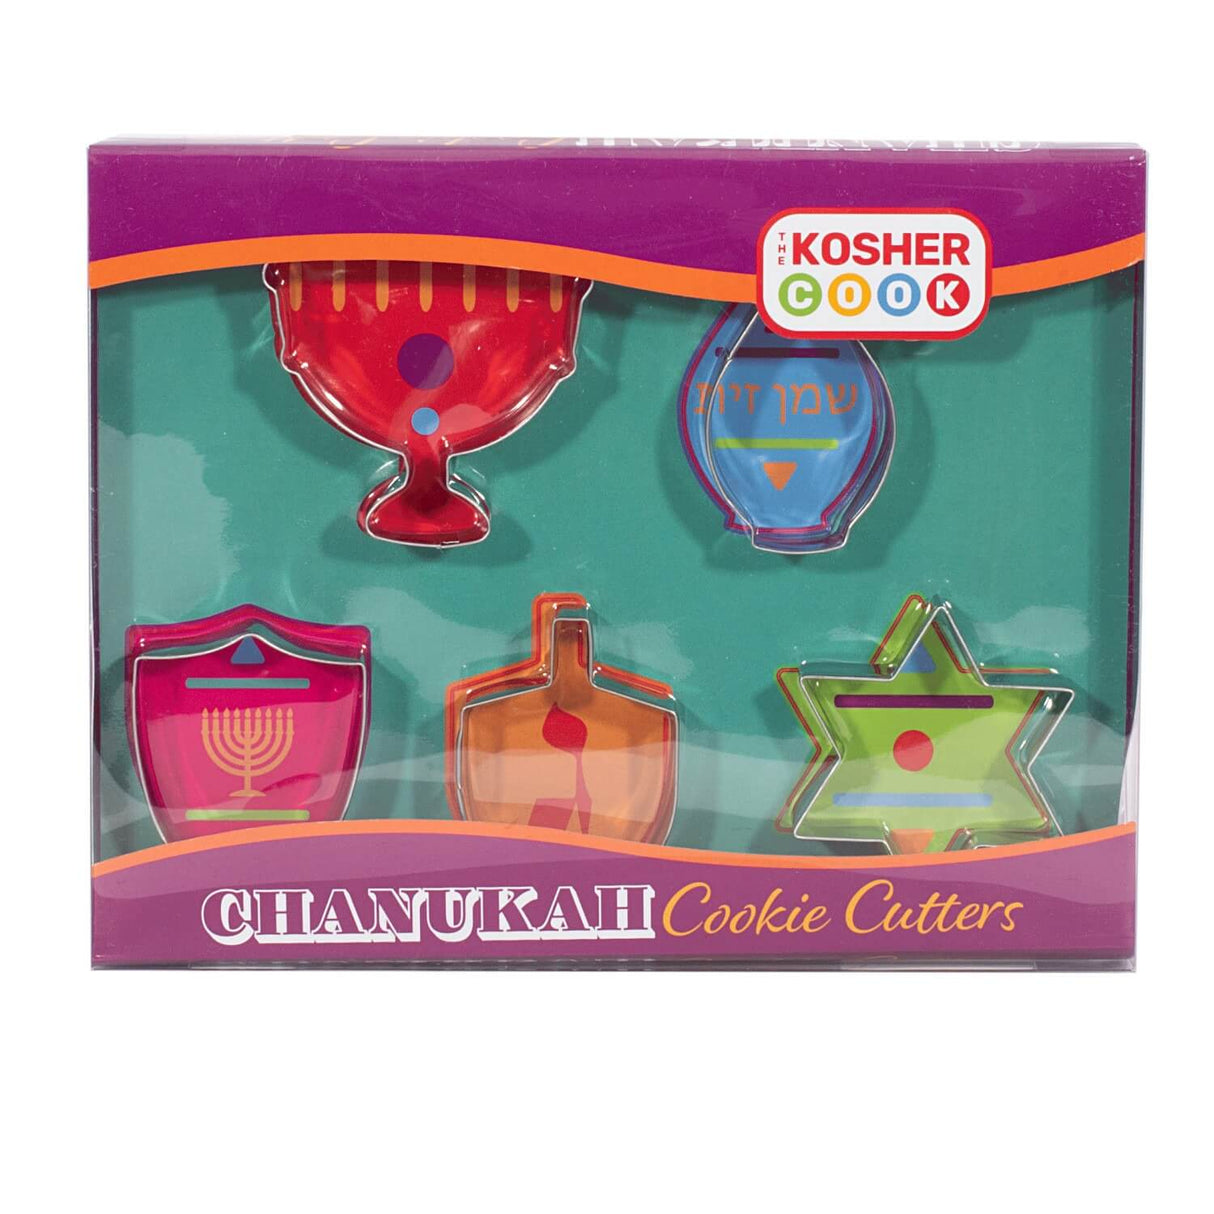 Kosher Cook S.S. Cookie Cutters Chanukah